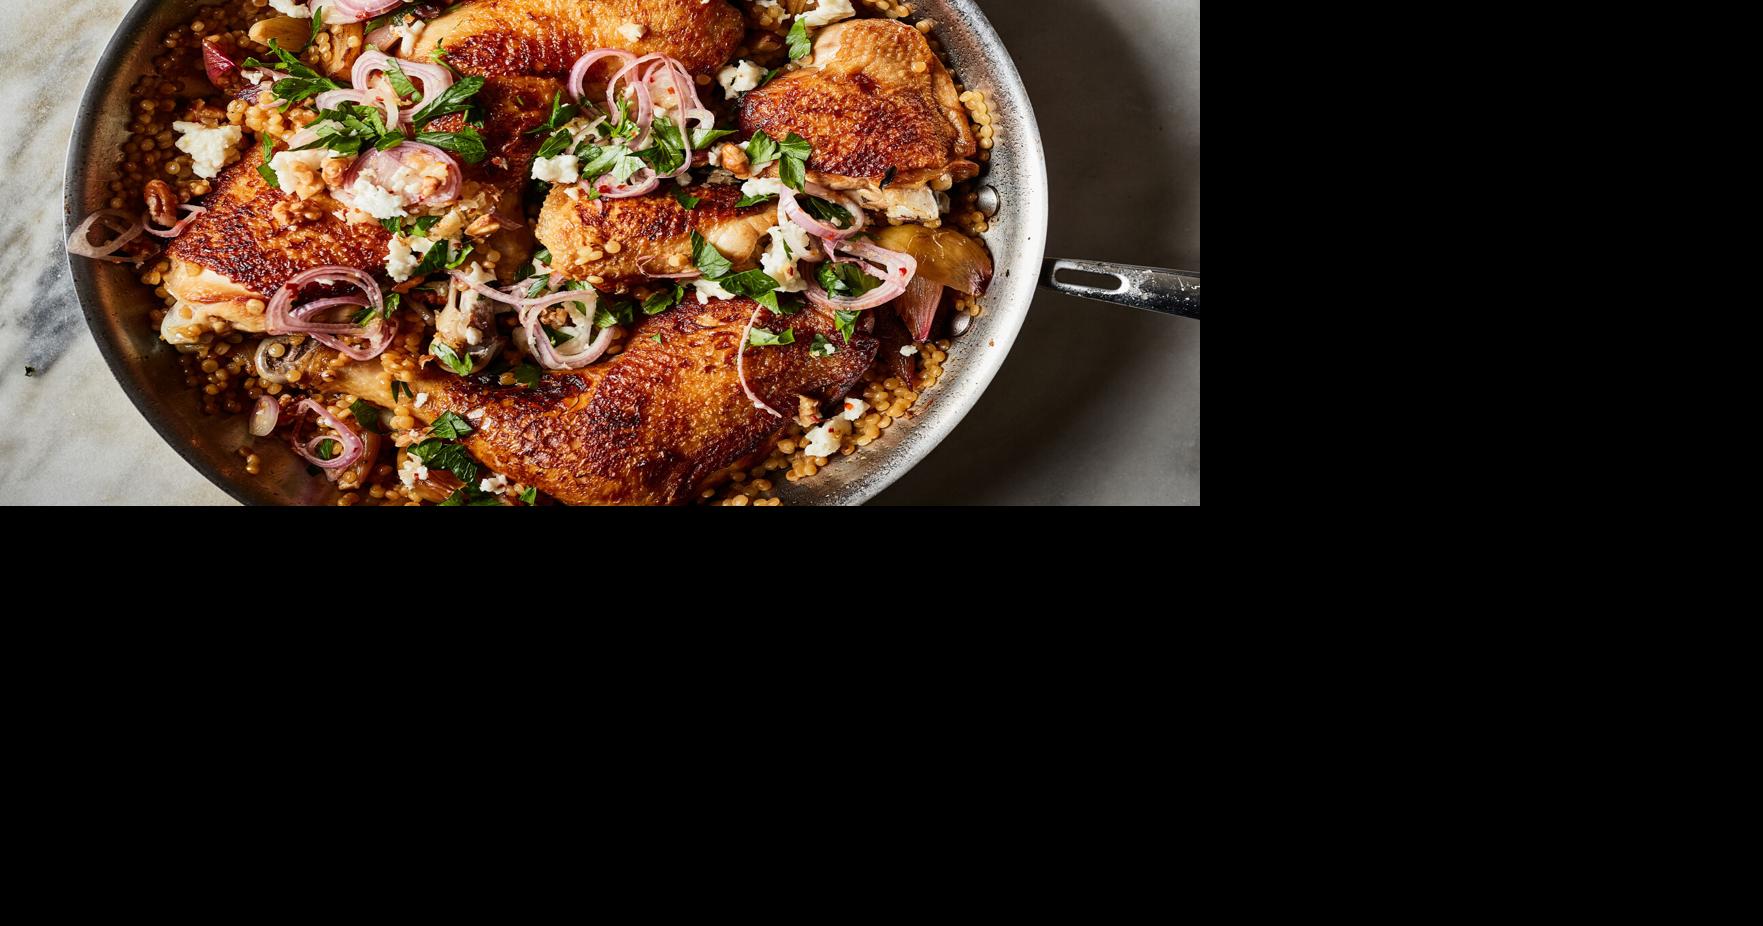 The most adaptable skillet chicken | Lifestyle | myheraldreview.com